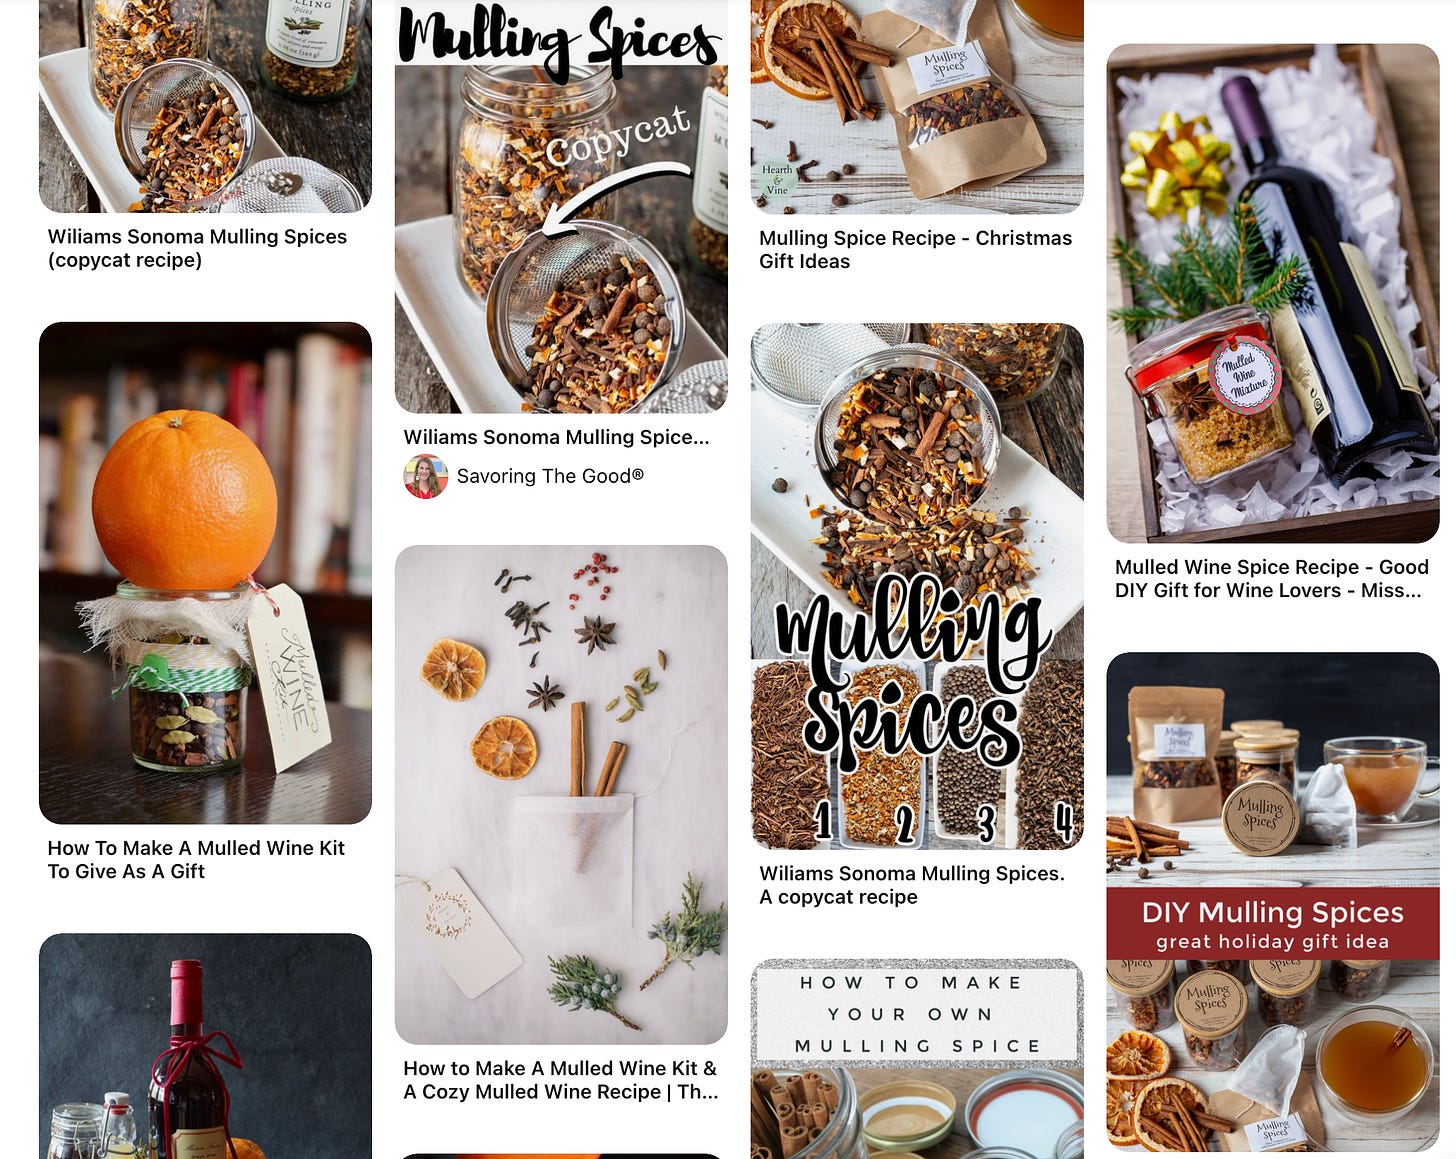 A screenshot from Pinterest showing different ideas for mulled wine kits